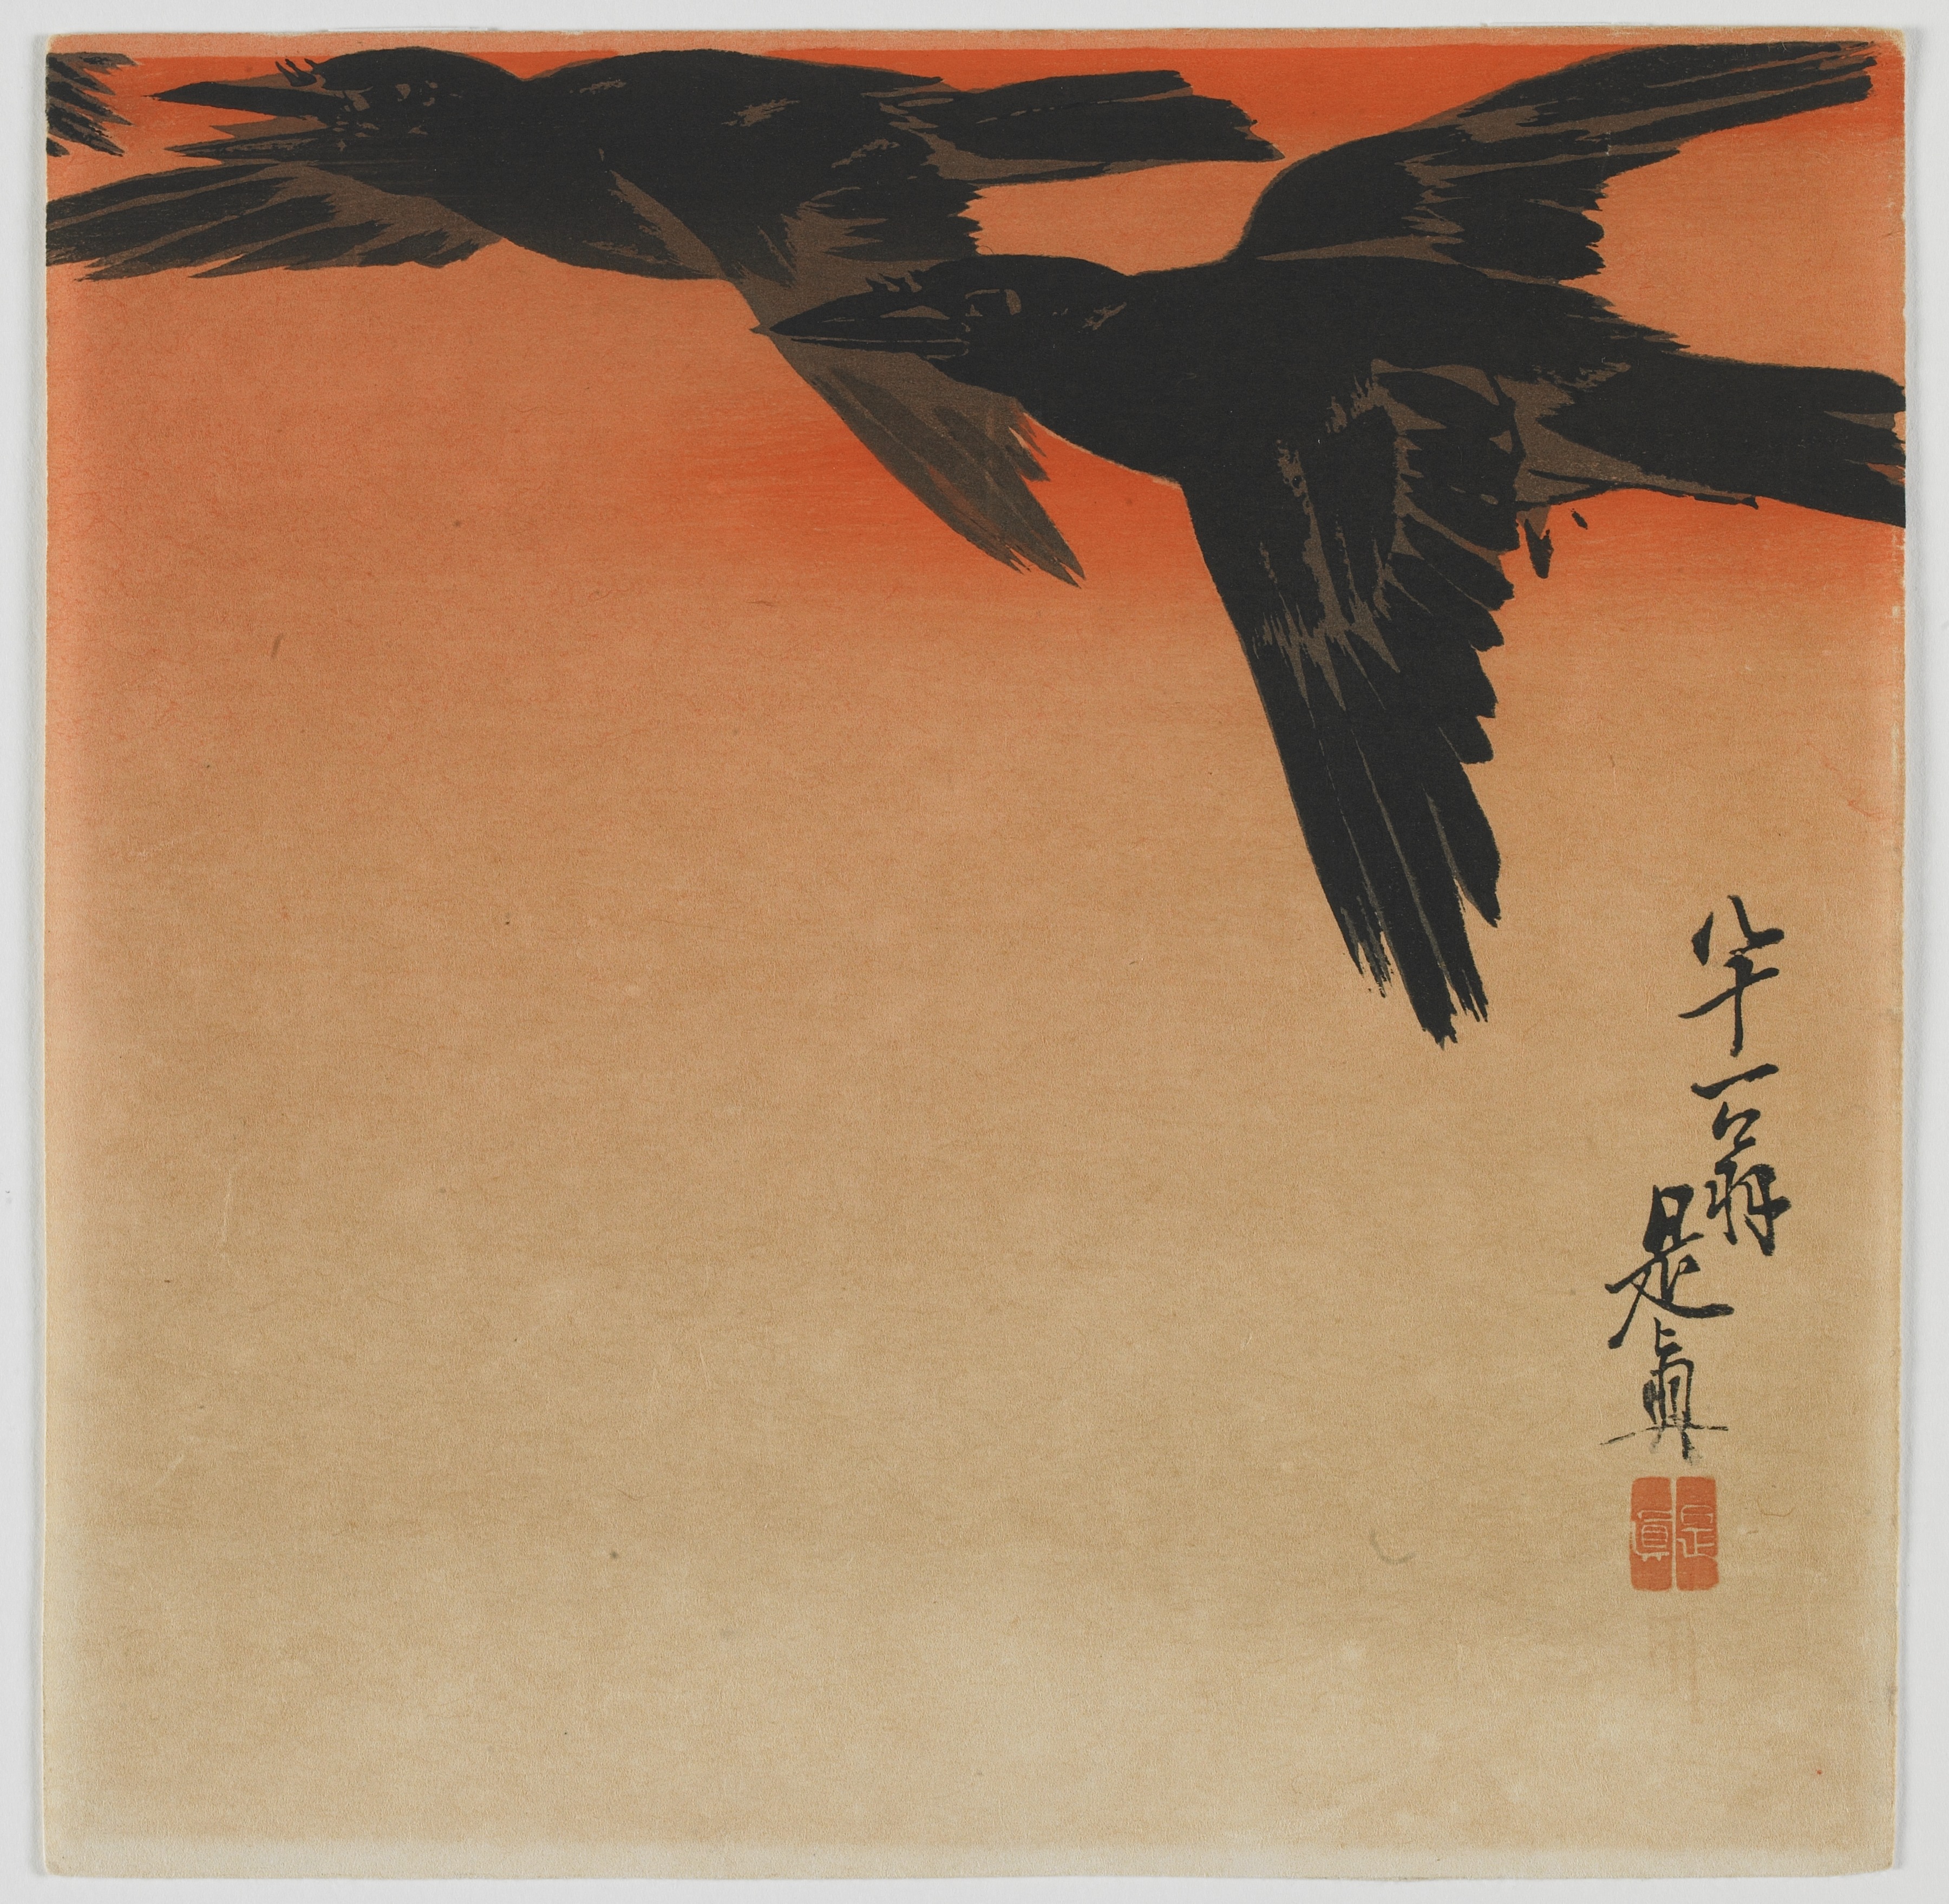 Crows at Twilight by Shibata Zeshin - late 19th century - 23.8 x 23.9 cm National Museum of Asian Art